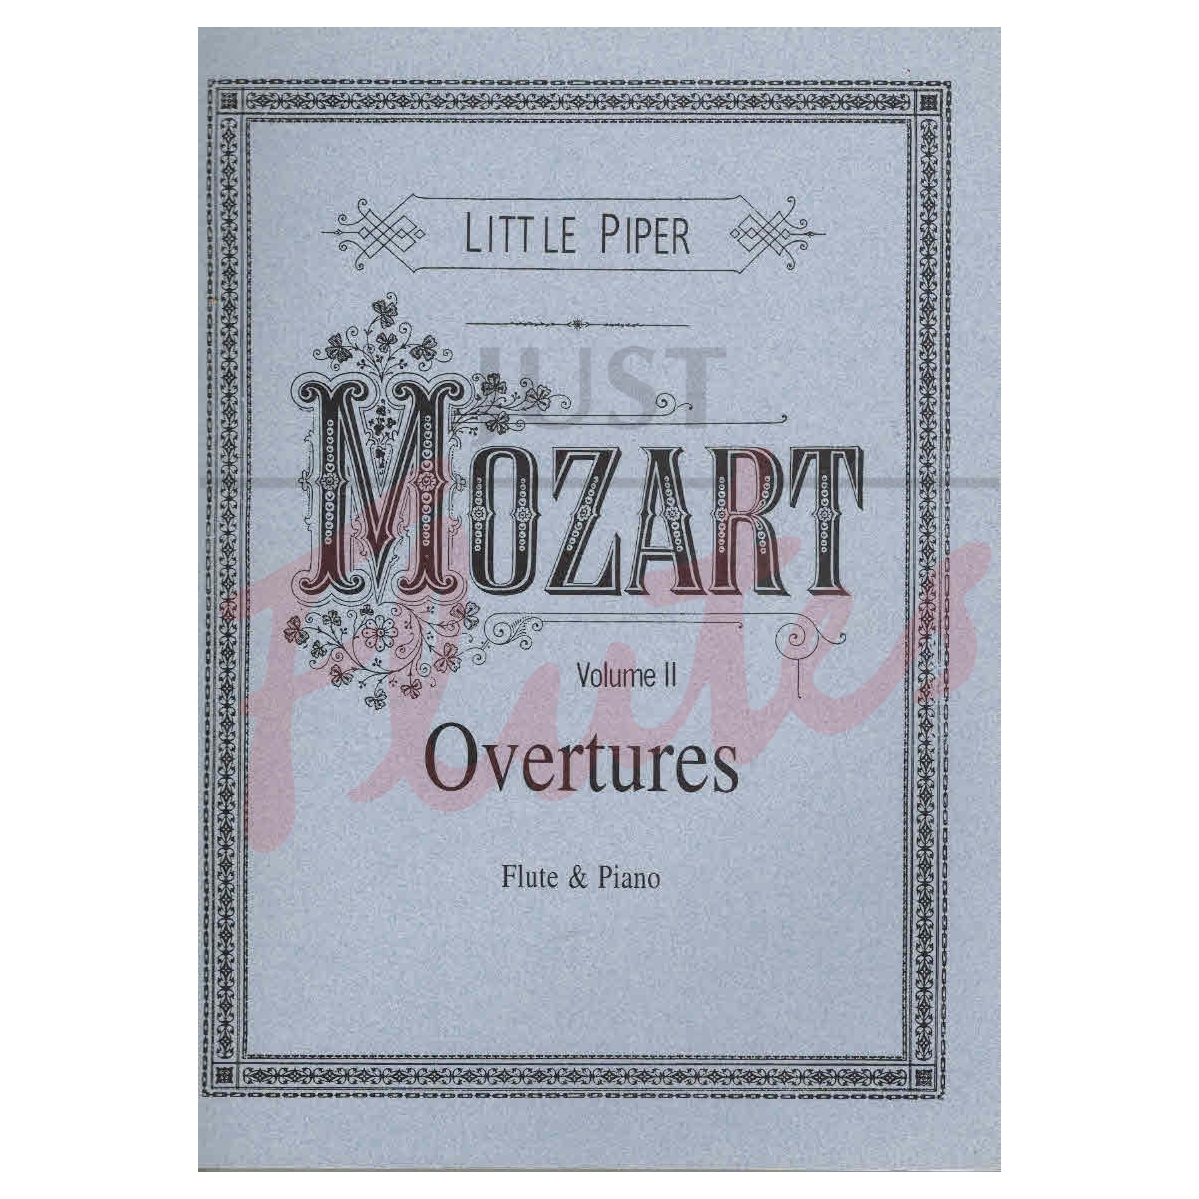 Overtures arranged for flute and piano